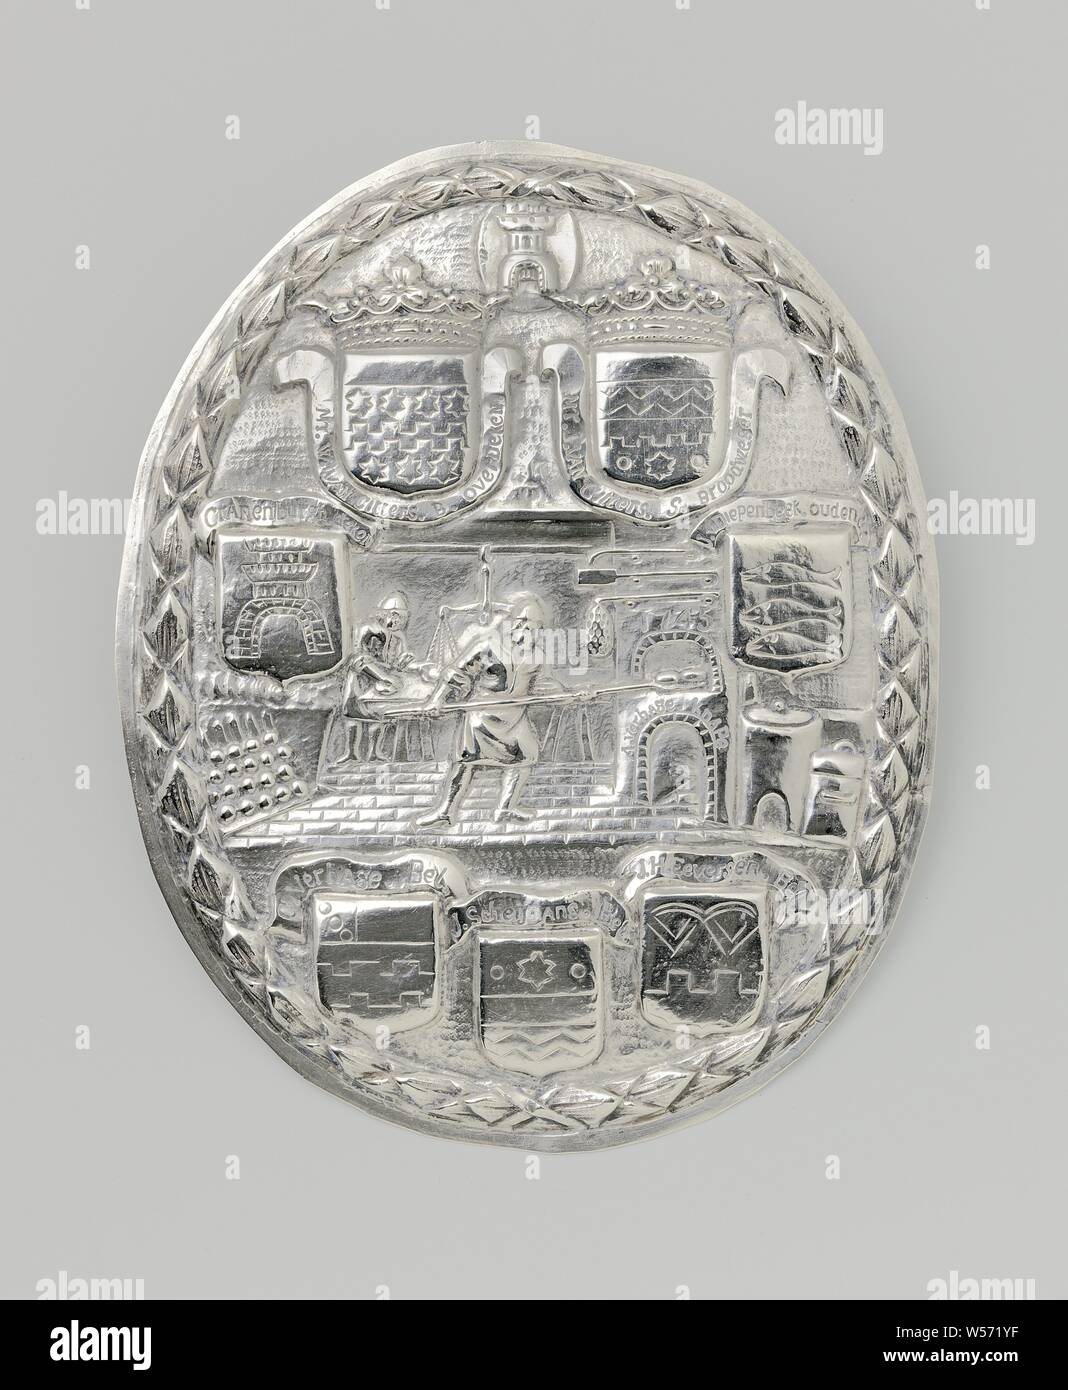 Oval silver shield of the baker's guild in Middelburg, Shield of the baker's guild in Middelburg. Oval, with a passionate depiction: in the middle a baker at his oven, behind him a boy with scales. Seven coats of arms with bindings with names. Two crowned weapons (Van Citters) and weapons from Cranenburch and Van Diepenbeek and three shields with the names Verhage, Scheymans and Eversen. On the oven, including 1745. On top of the shield the coat of arms of Middelburg. The whole is surrounded by a leaf wreath. Not marked, Middelburg, anonymous, 1745, silver (metal), h 17.4 cm × w 14.1 cm Stock Photo